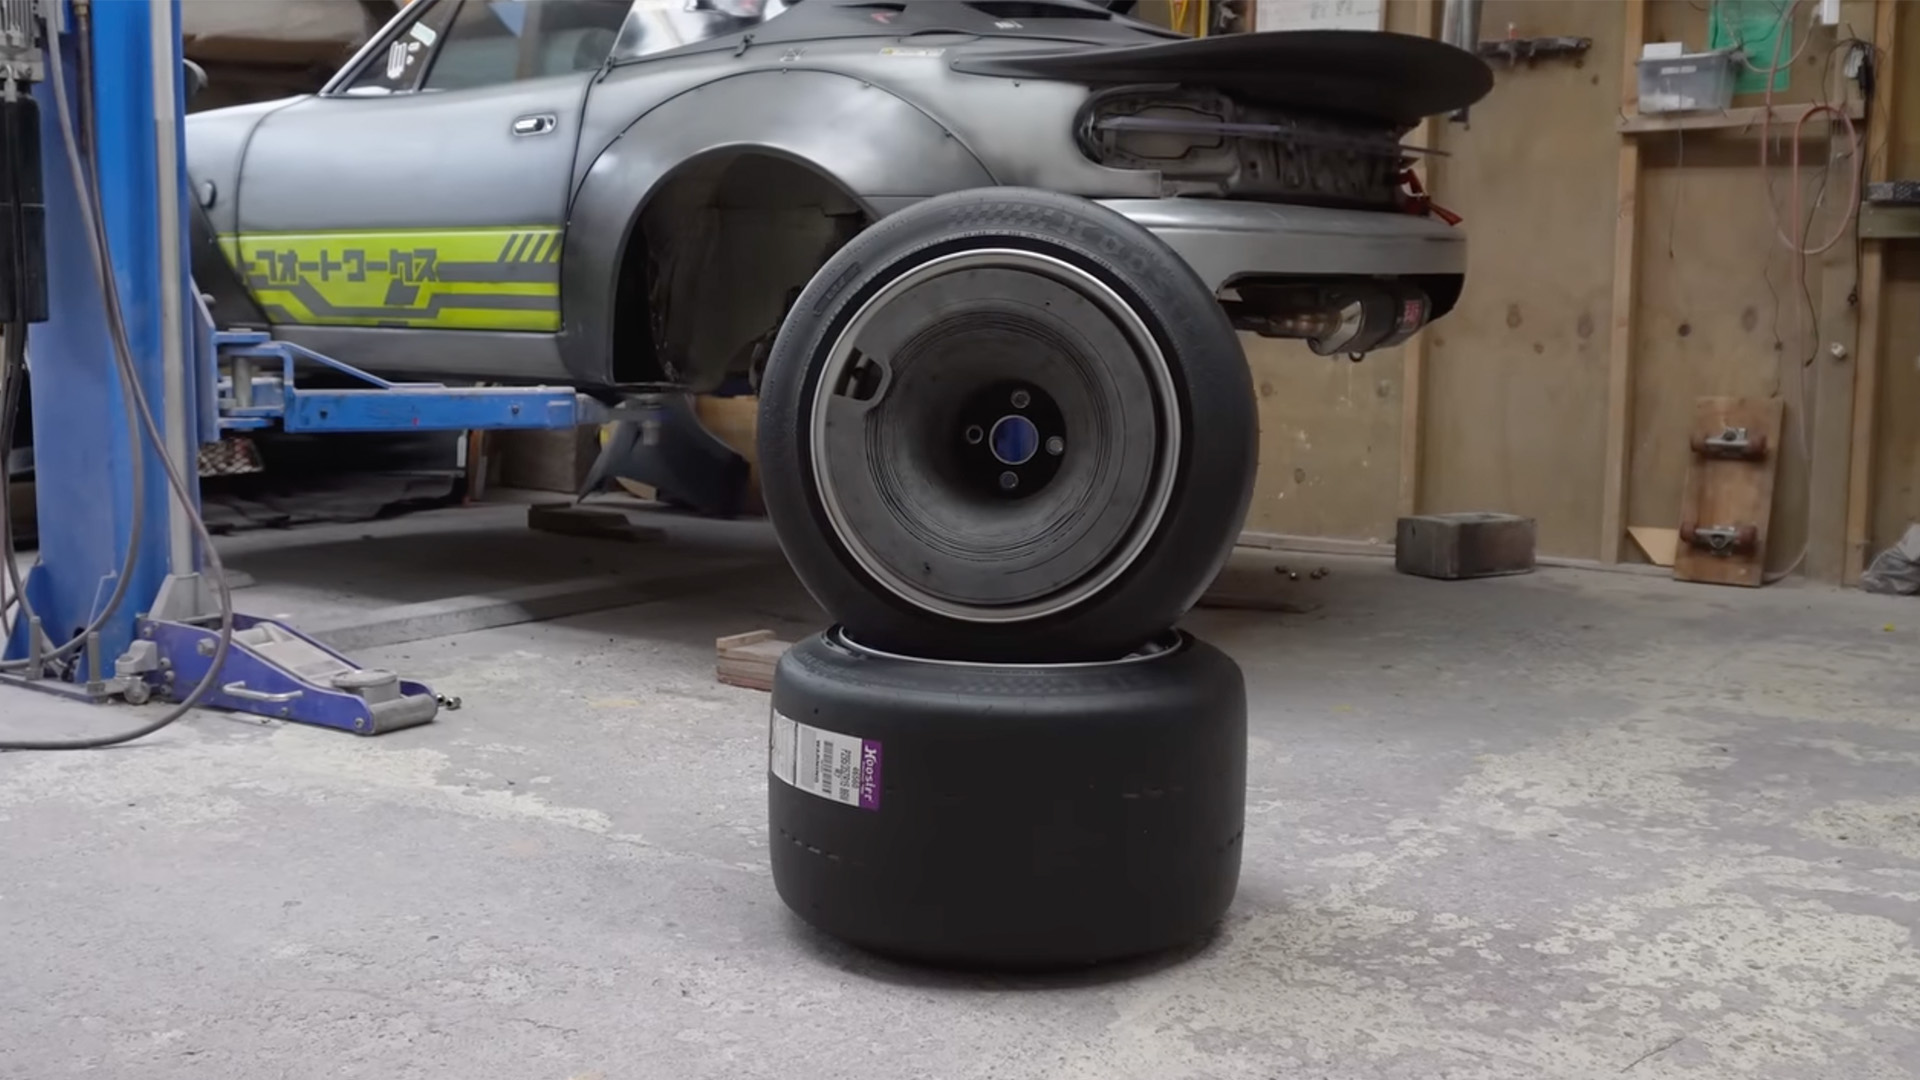 Cyberpunk Miata Turbofans Look the Part Because They’re Made From Scratch